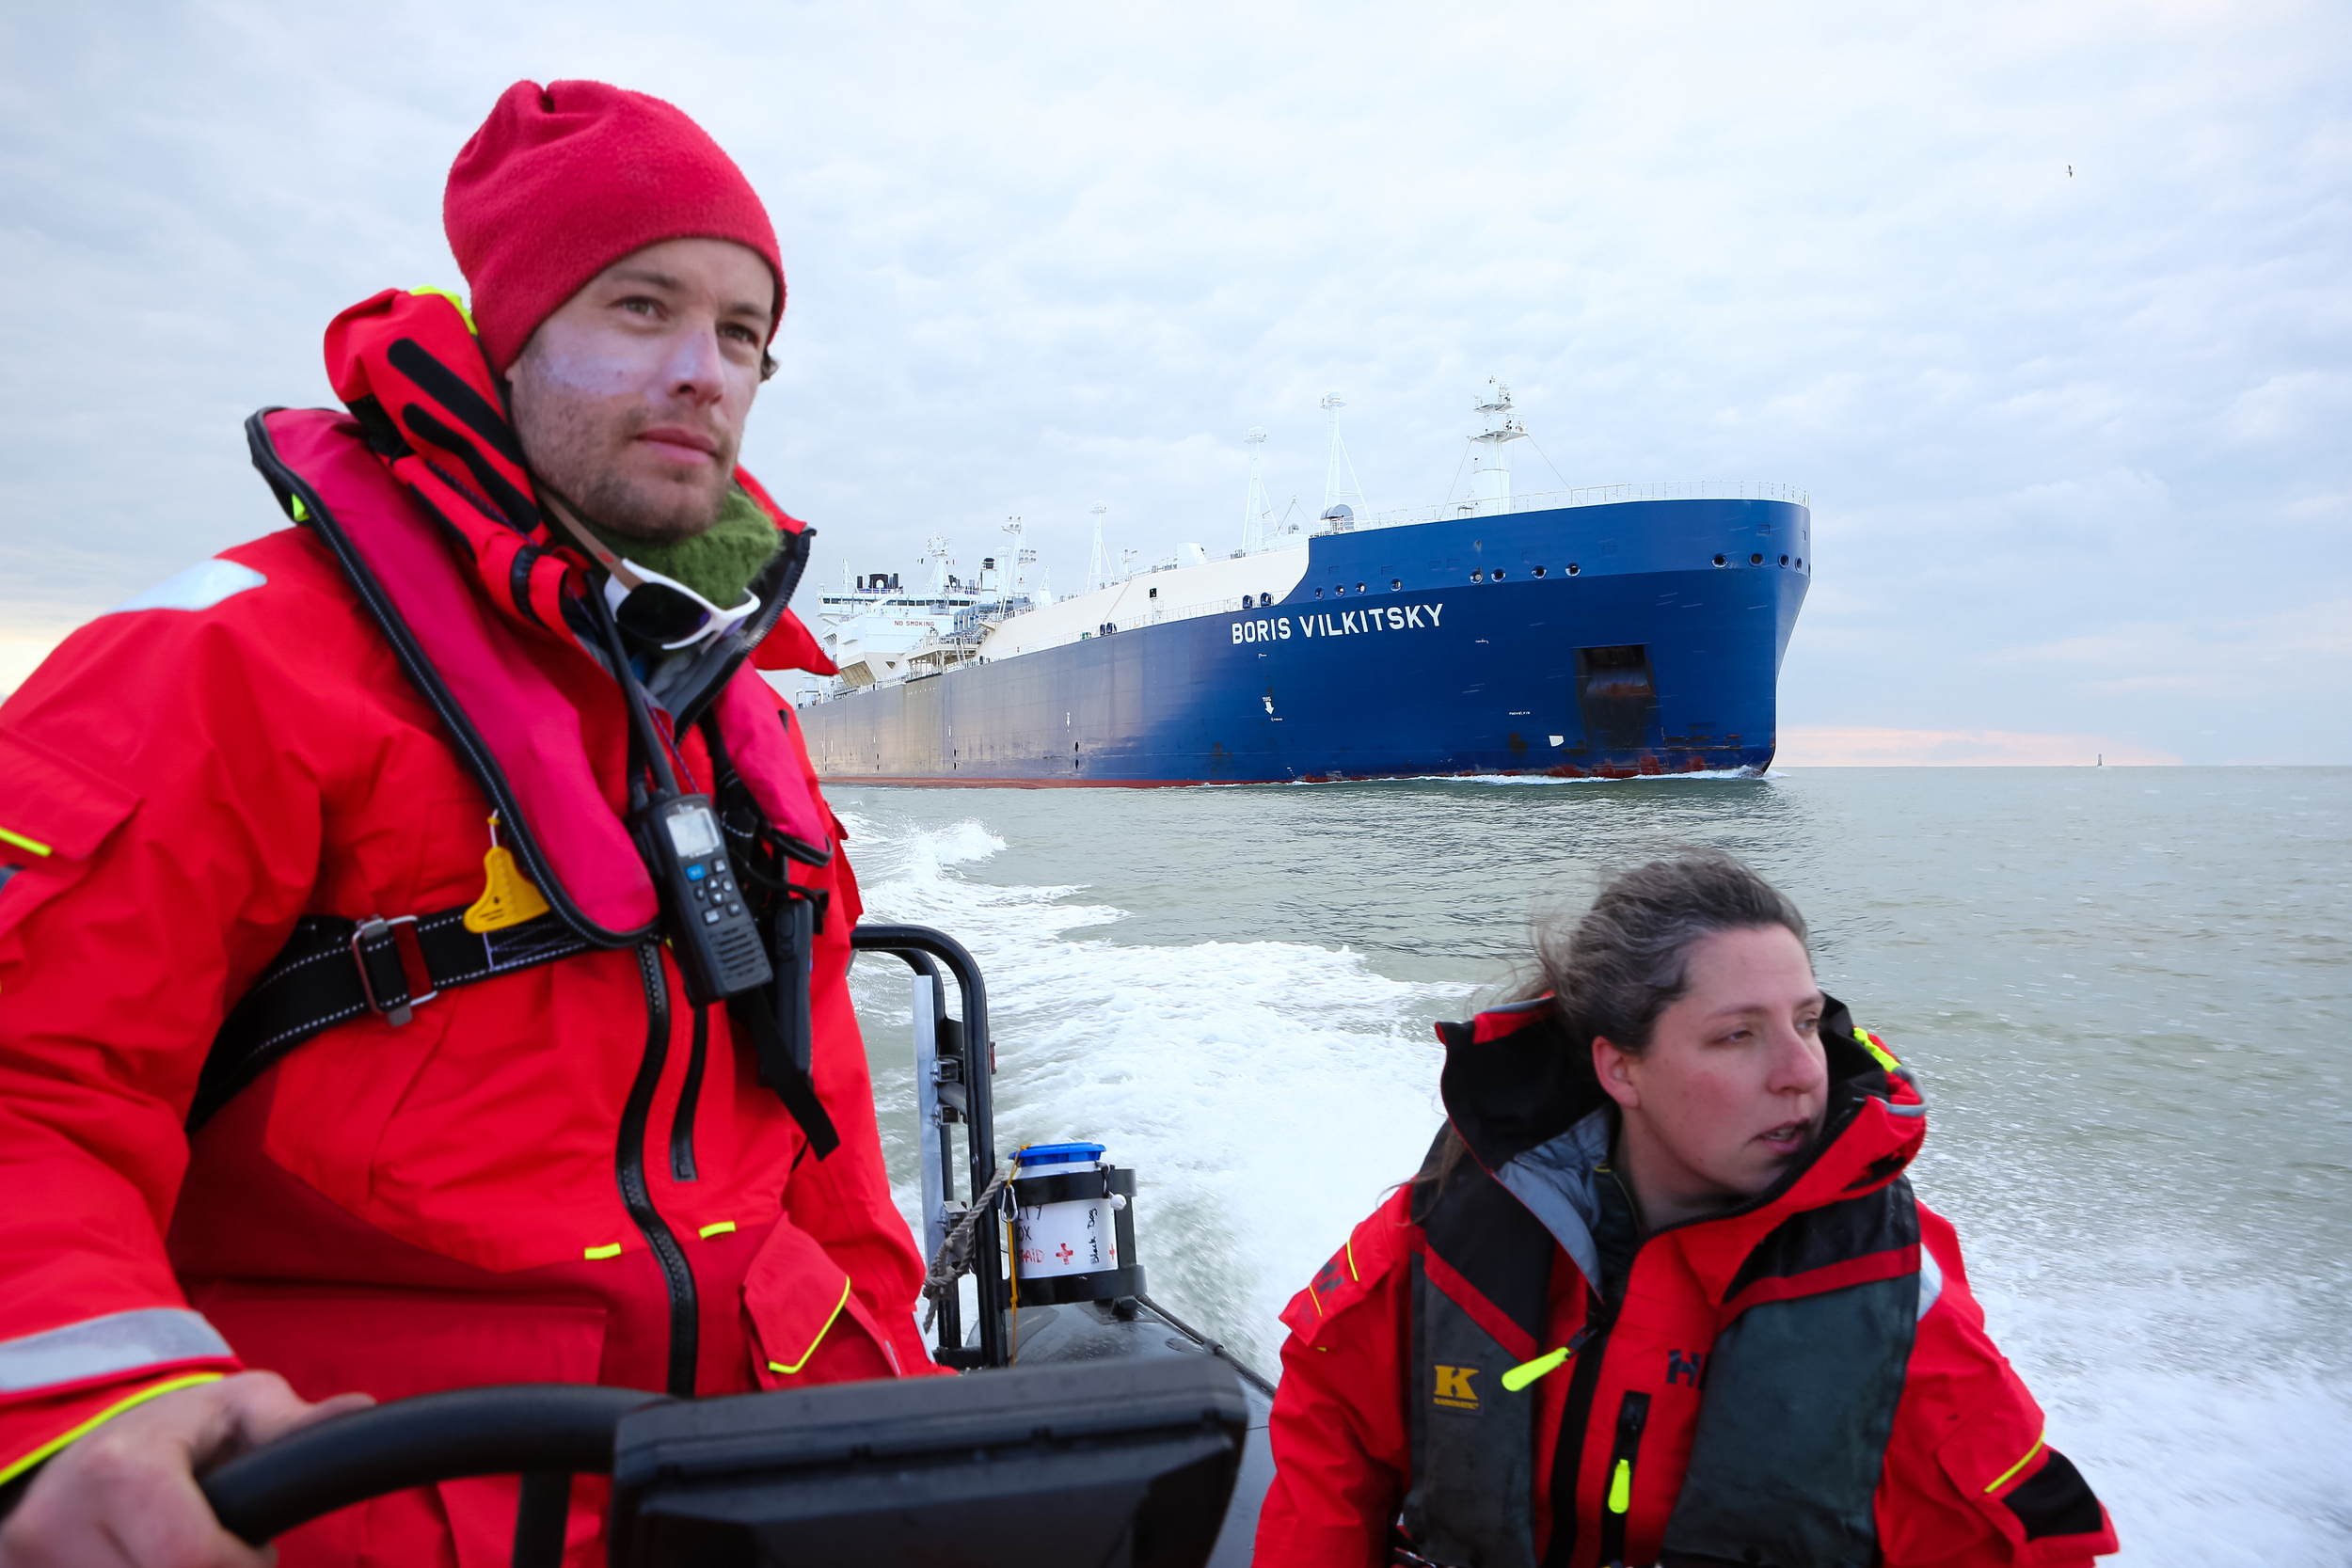 Two people in a rigid-hulled inflatable boat travelling in open water, a large oil tanker in the background